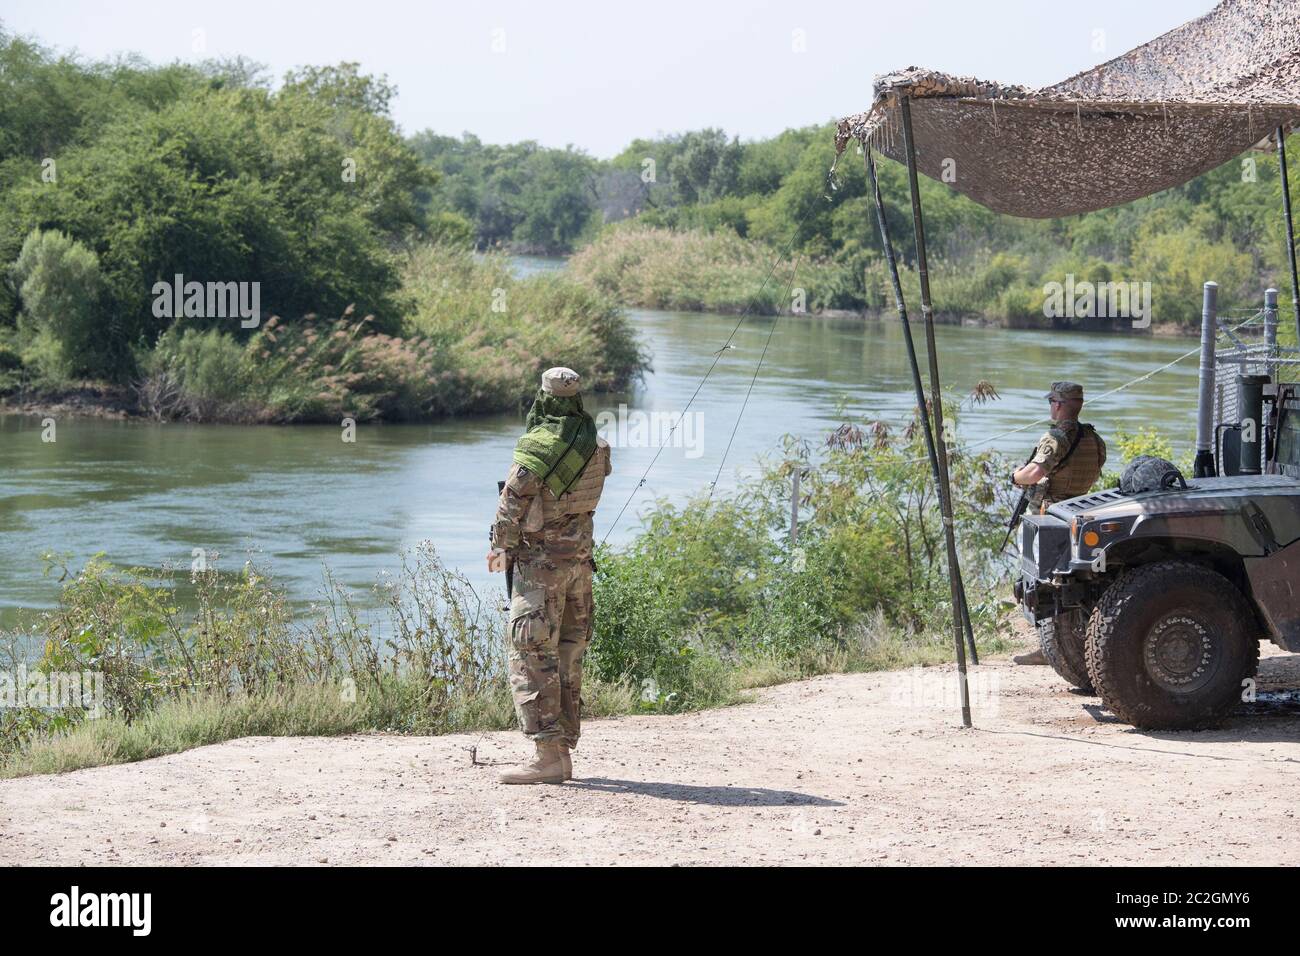 Roma Texas April 13, 2018: Texas National Guard troops man a observation post along the Rio Grande River as it flows southward between the bluffs of Roma and the Mexican city of Ciudad Miguel Aleman to the left.  Over a thousand National Guard troops were called up to enhance border security in Texas. ©Bob Daemmrich Stock Photo